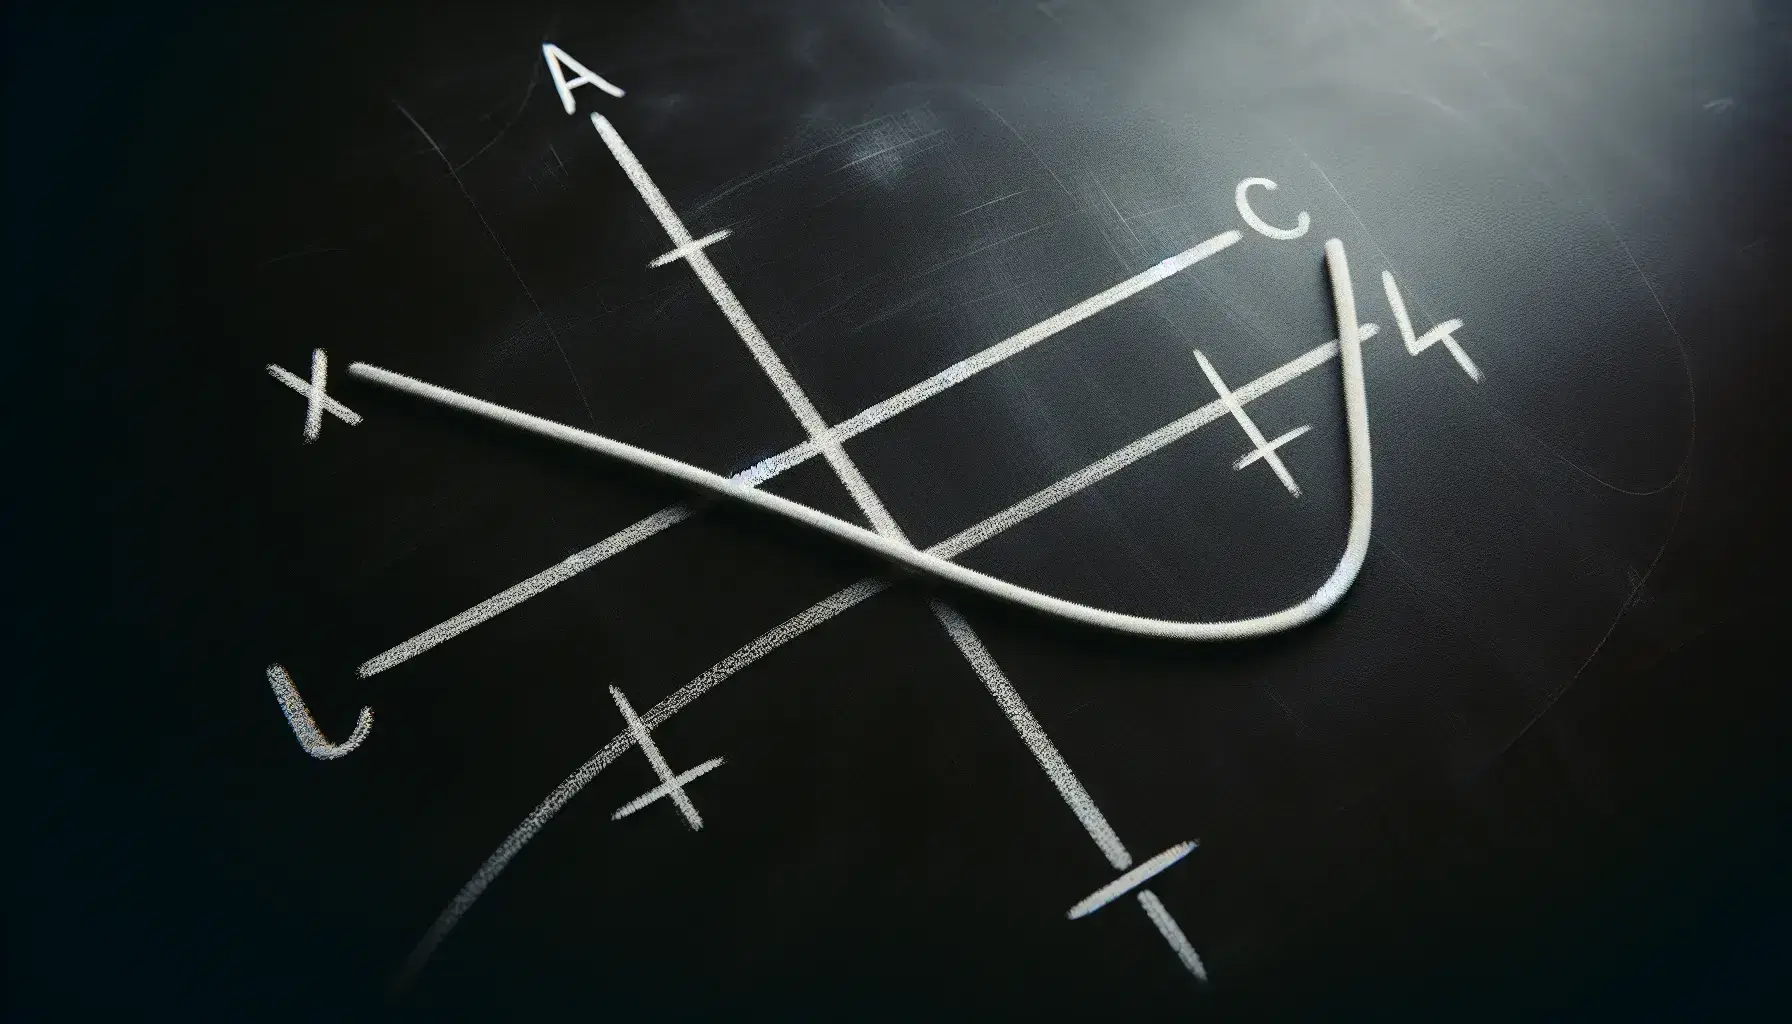 Close-up view of a Cartesian coordinate system on a blackboard with an asymptotic curve approaching the vertical axis.